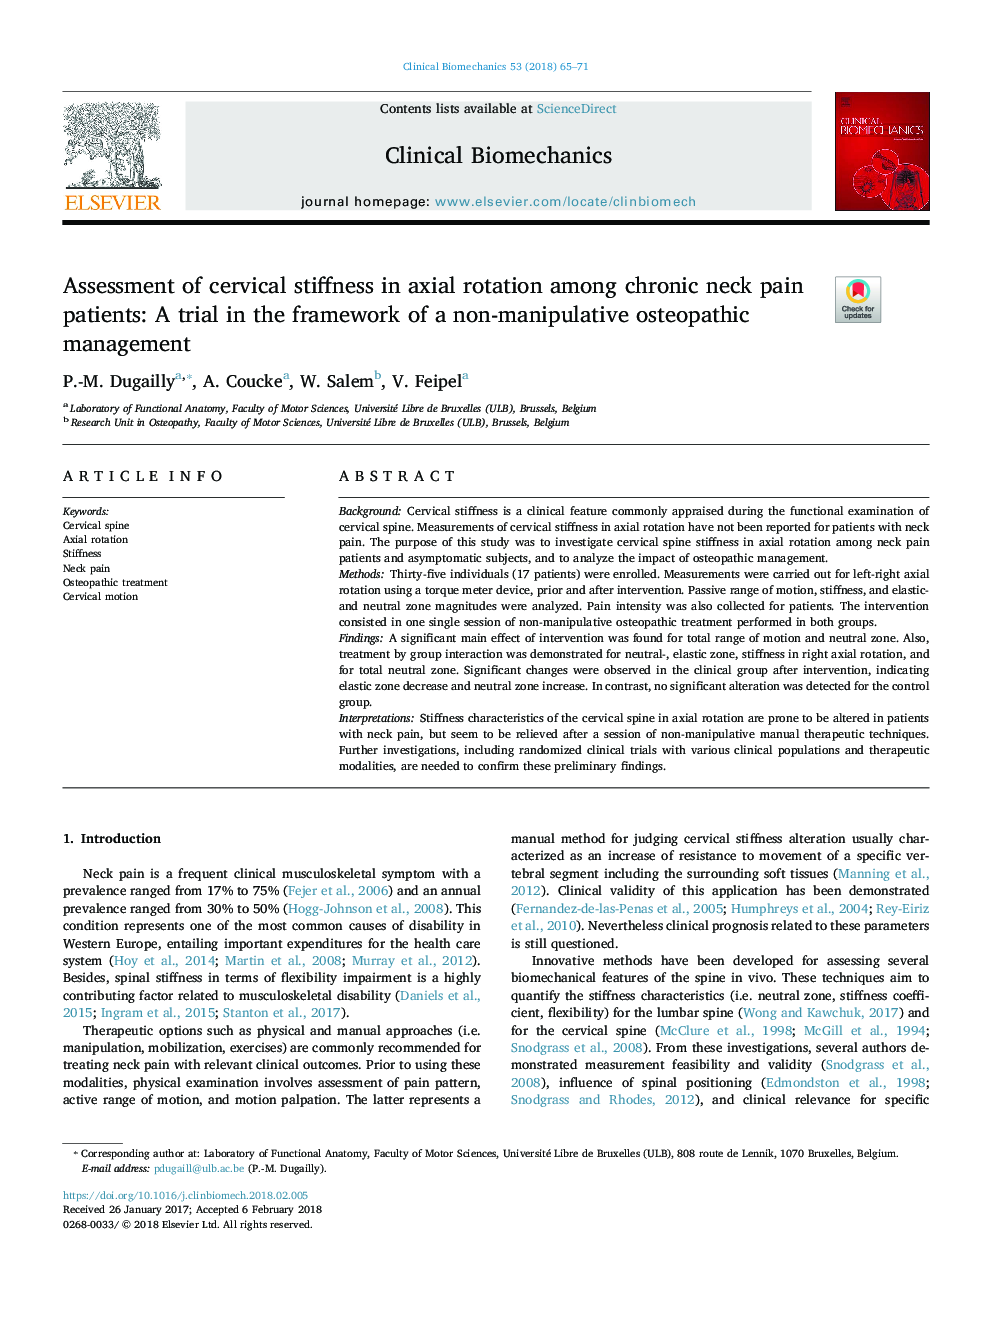 Assessment of cervical stiffness in axial rotation among chronic neck pain patients: A trial in the framework of a non-manipulative osteopathic management